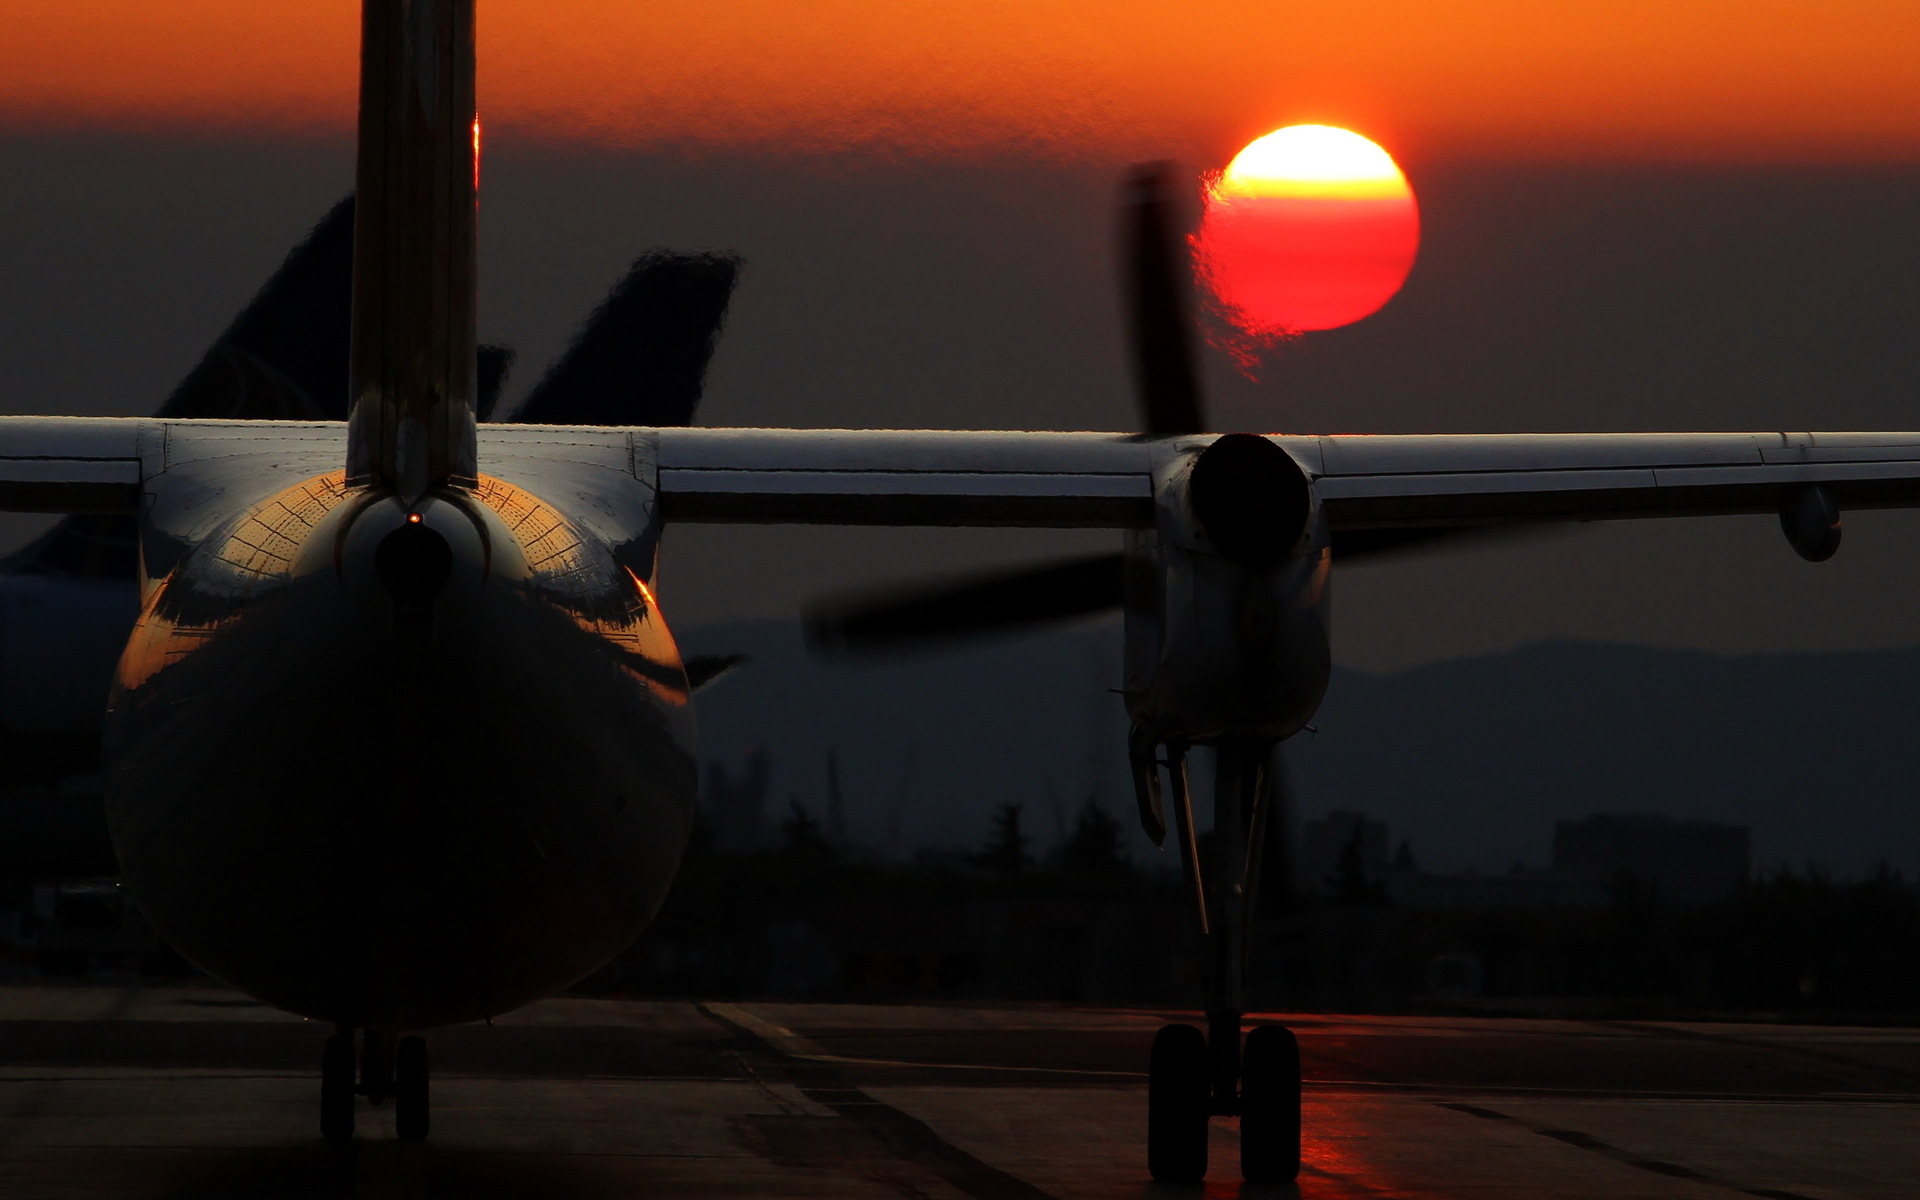 sunset, vehicles, aircraft, airplane, fly, jet fighter, photography, sun